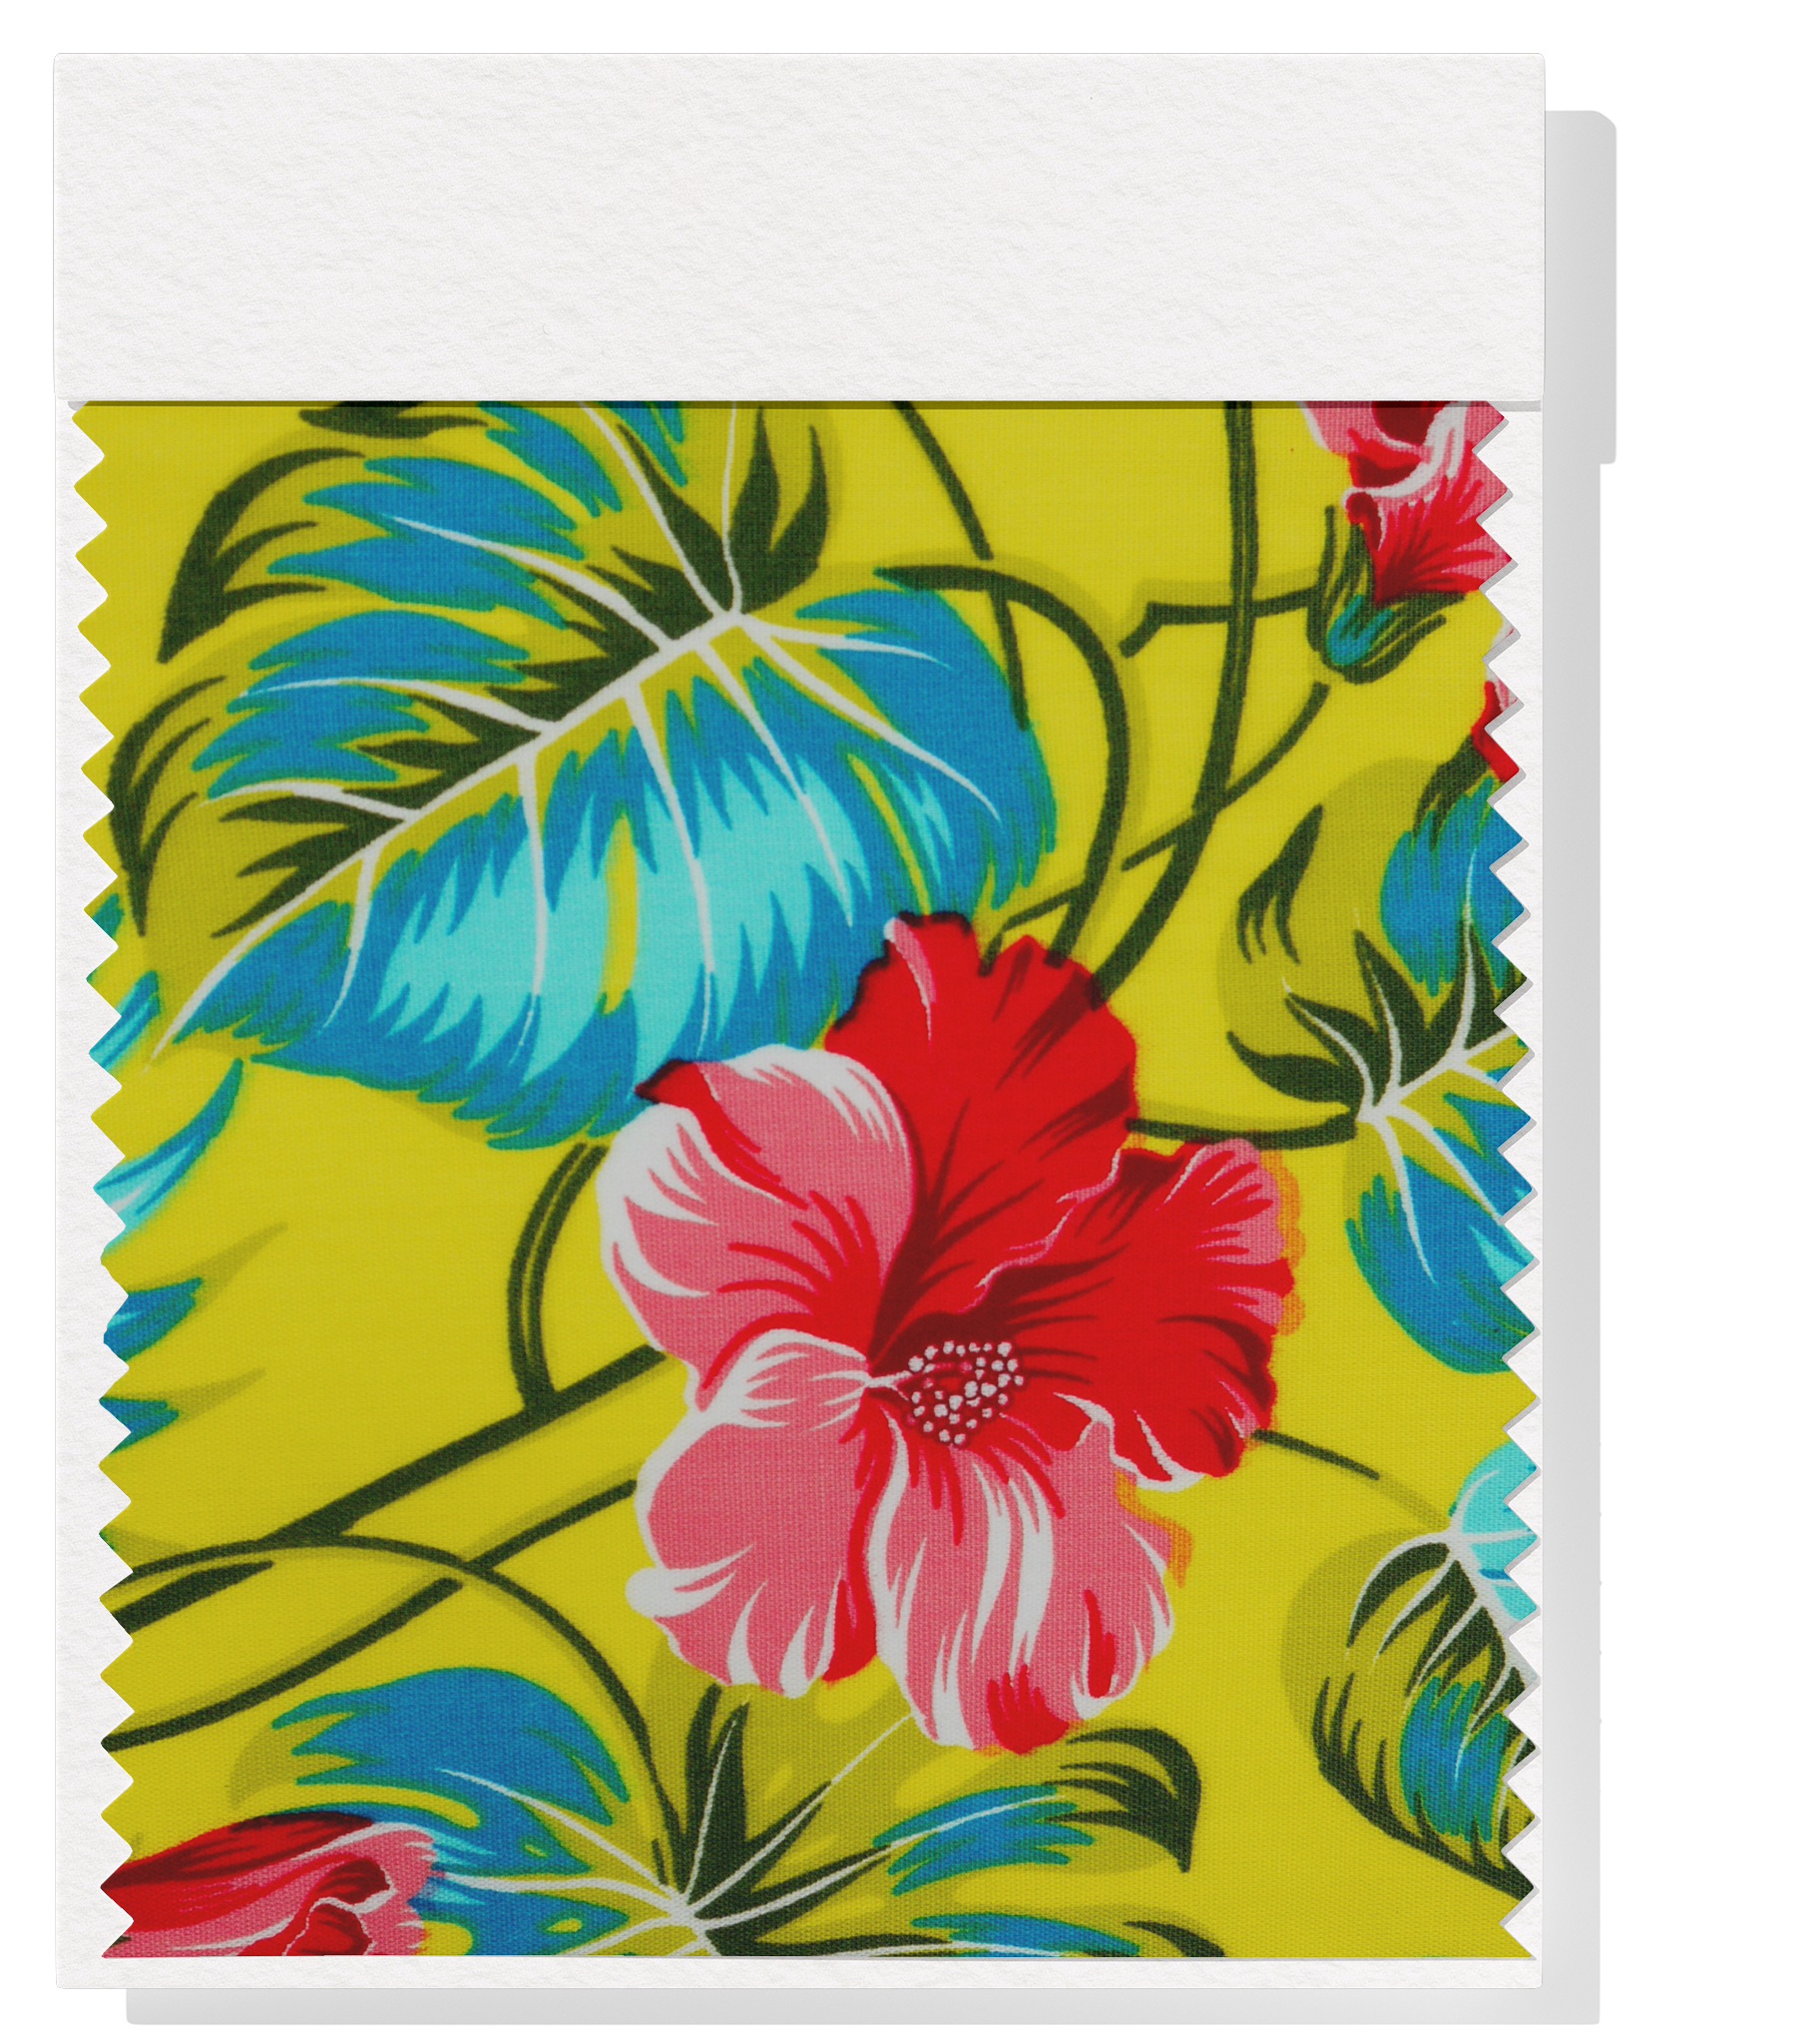 Pacific Printed Rayon $8.00p/m - Yellow, Blue & Red